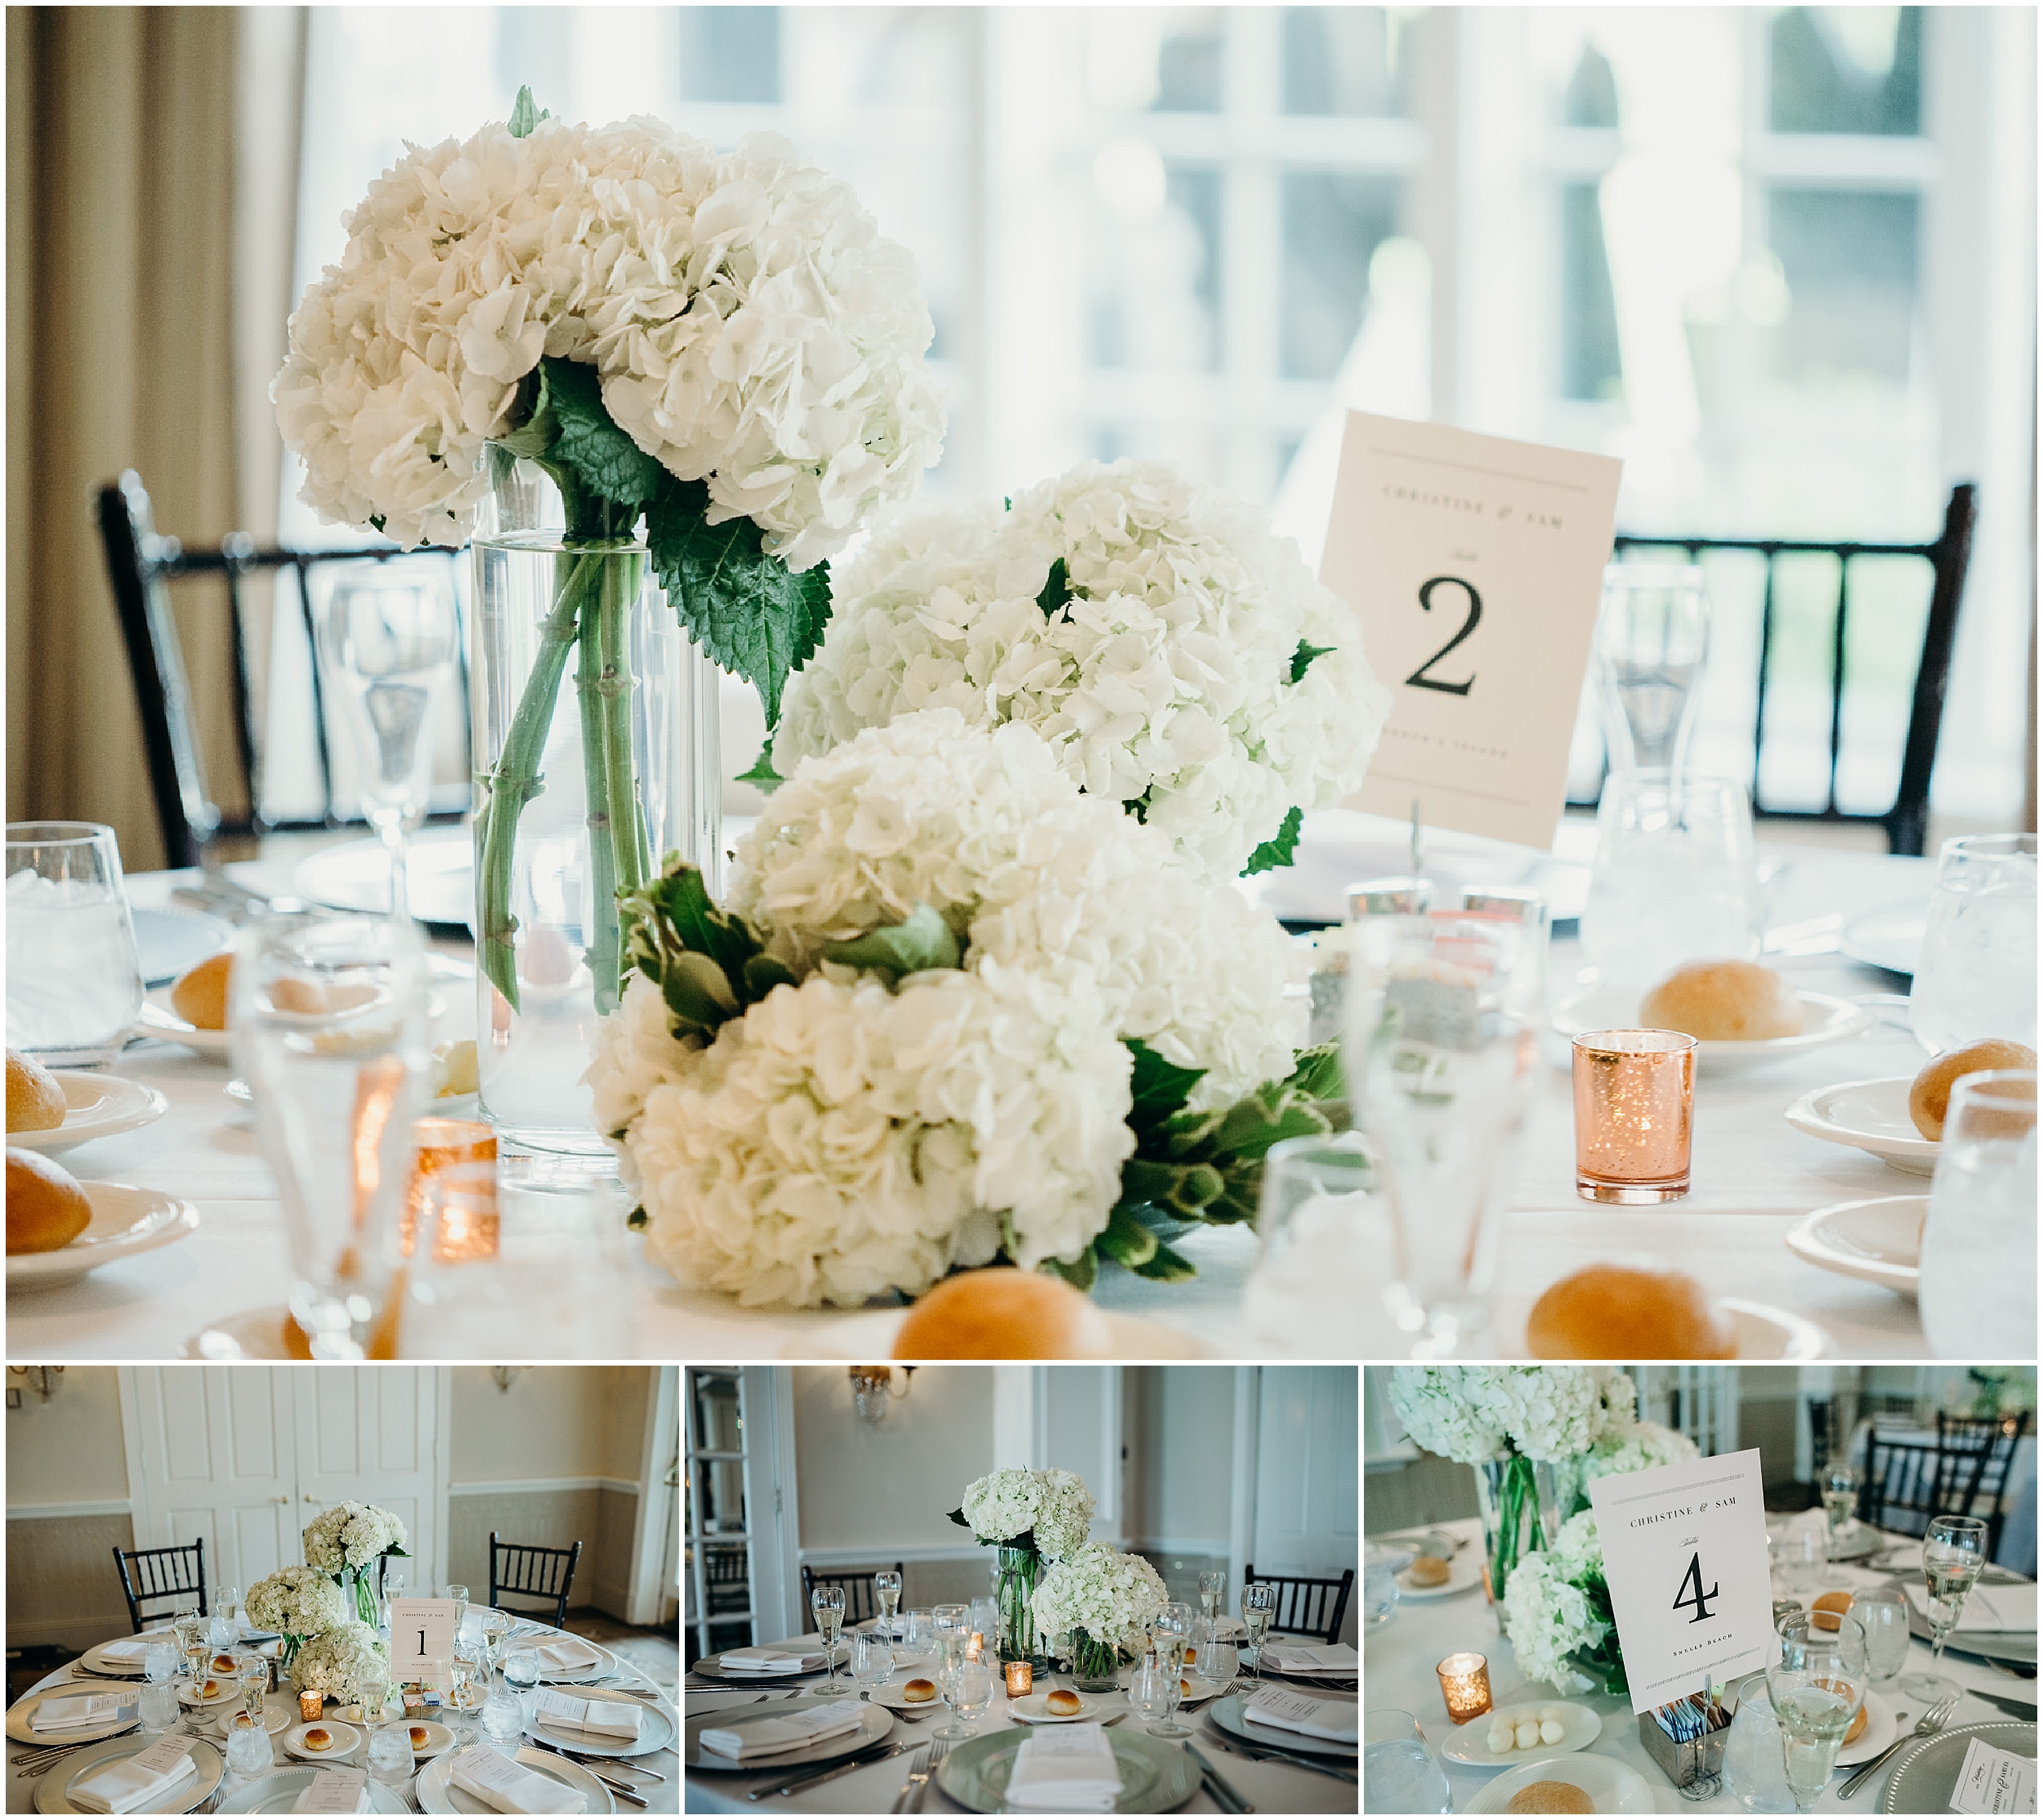 wedding reception decor at the upper montclair country club in montclair, new jersey